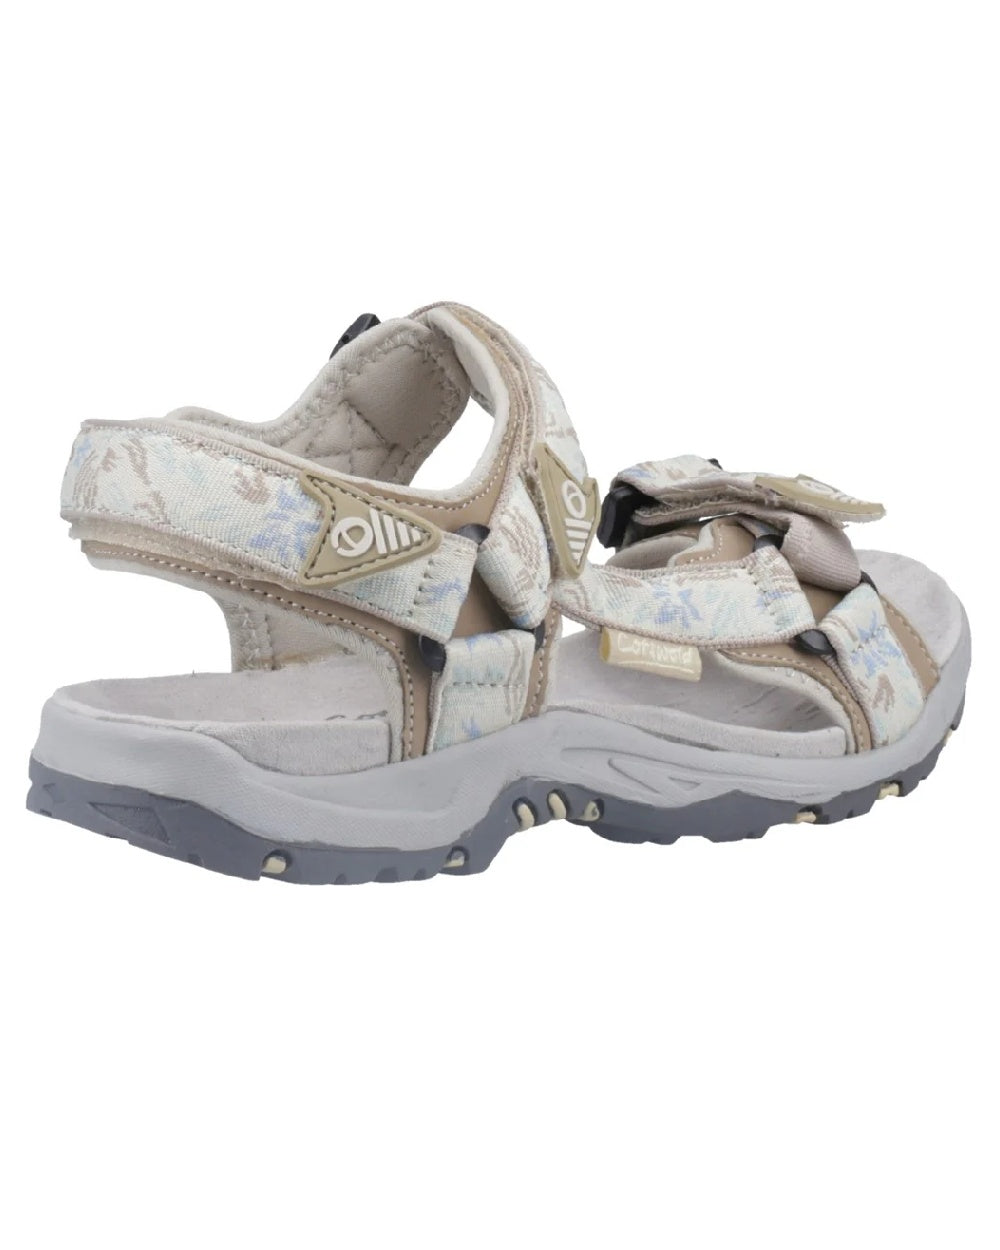 Beige coloured Cotswold Foxcote Sandals on white background 